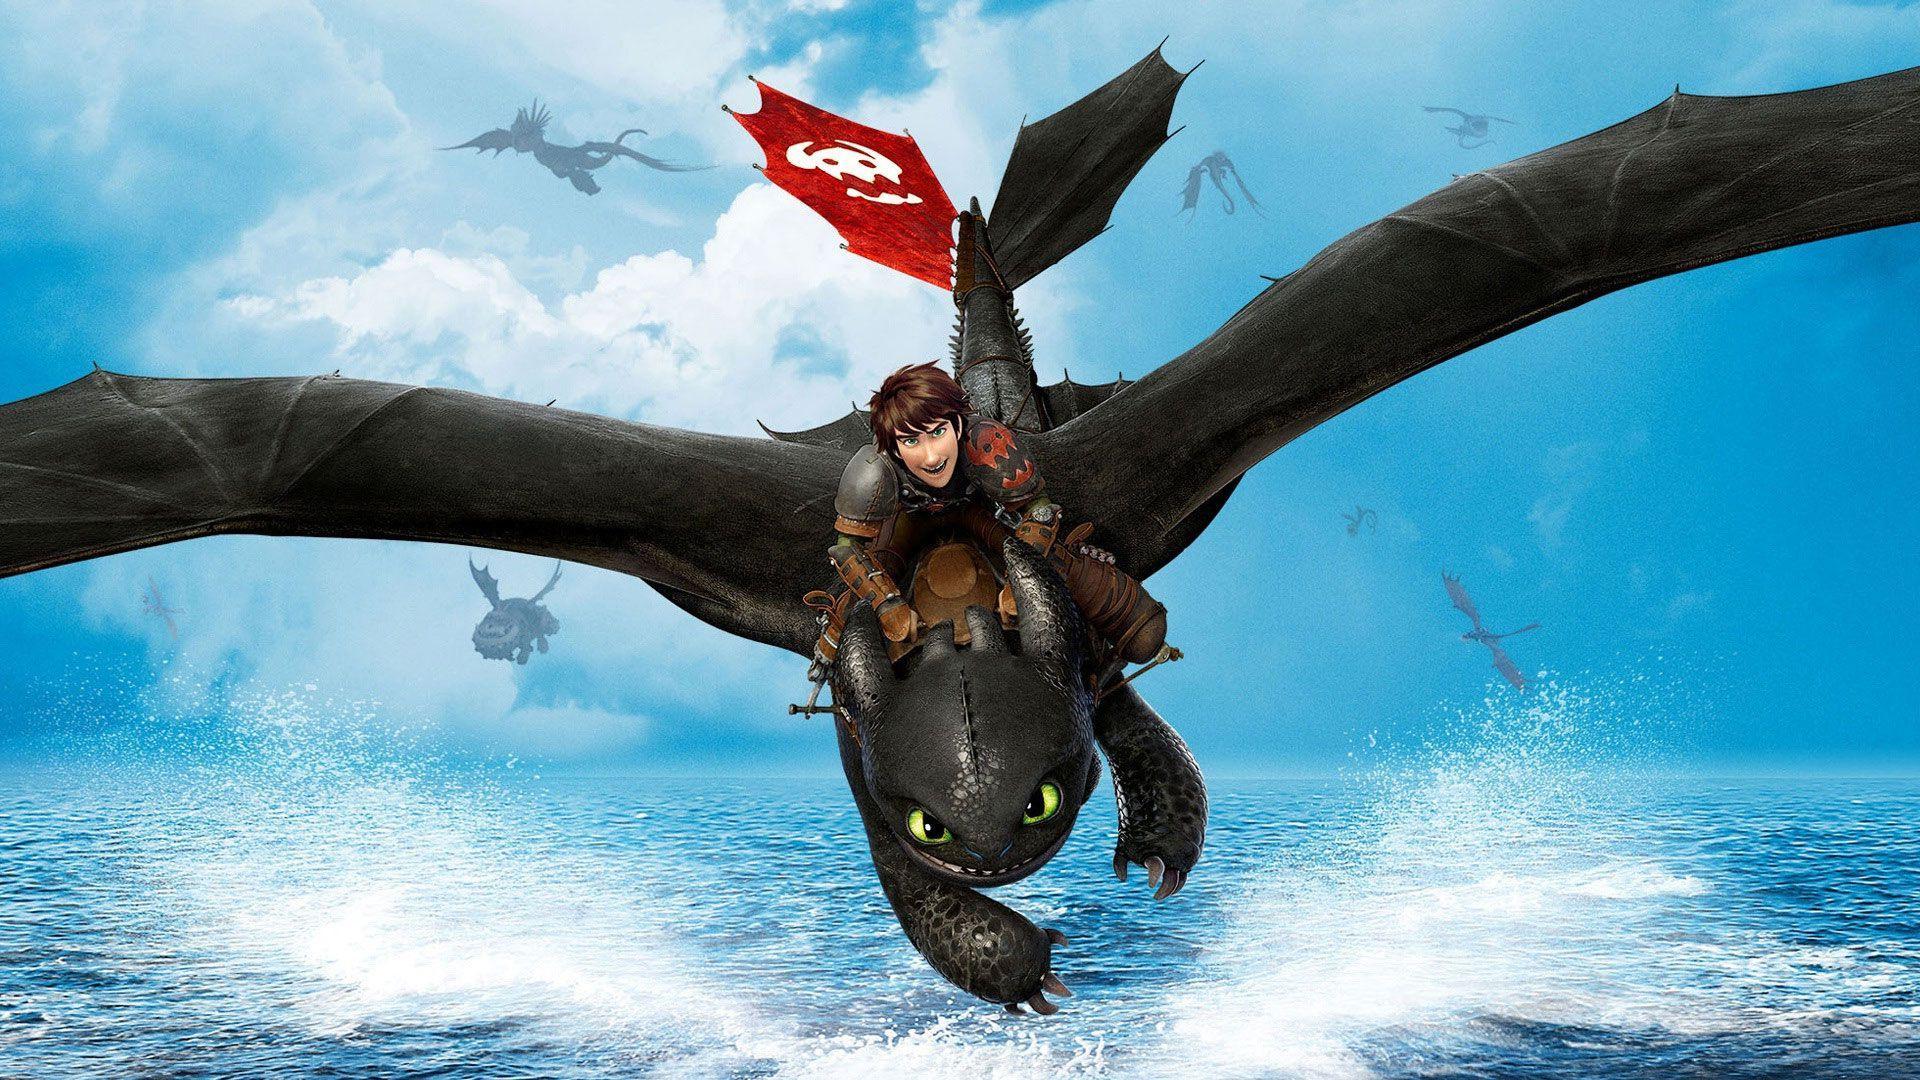 How To Train Your Dragon Wallpaper Free How To Train Your